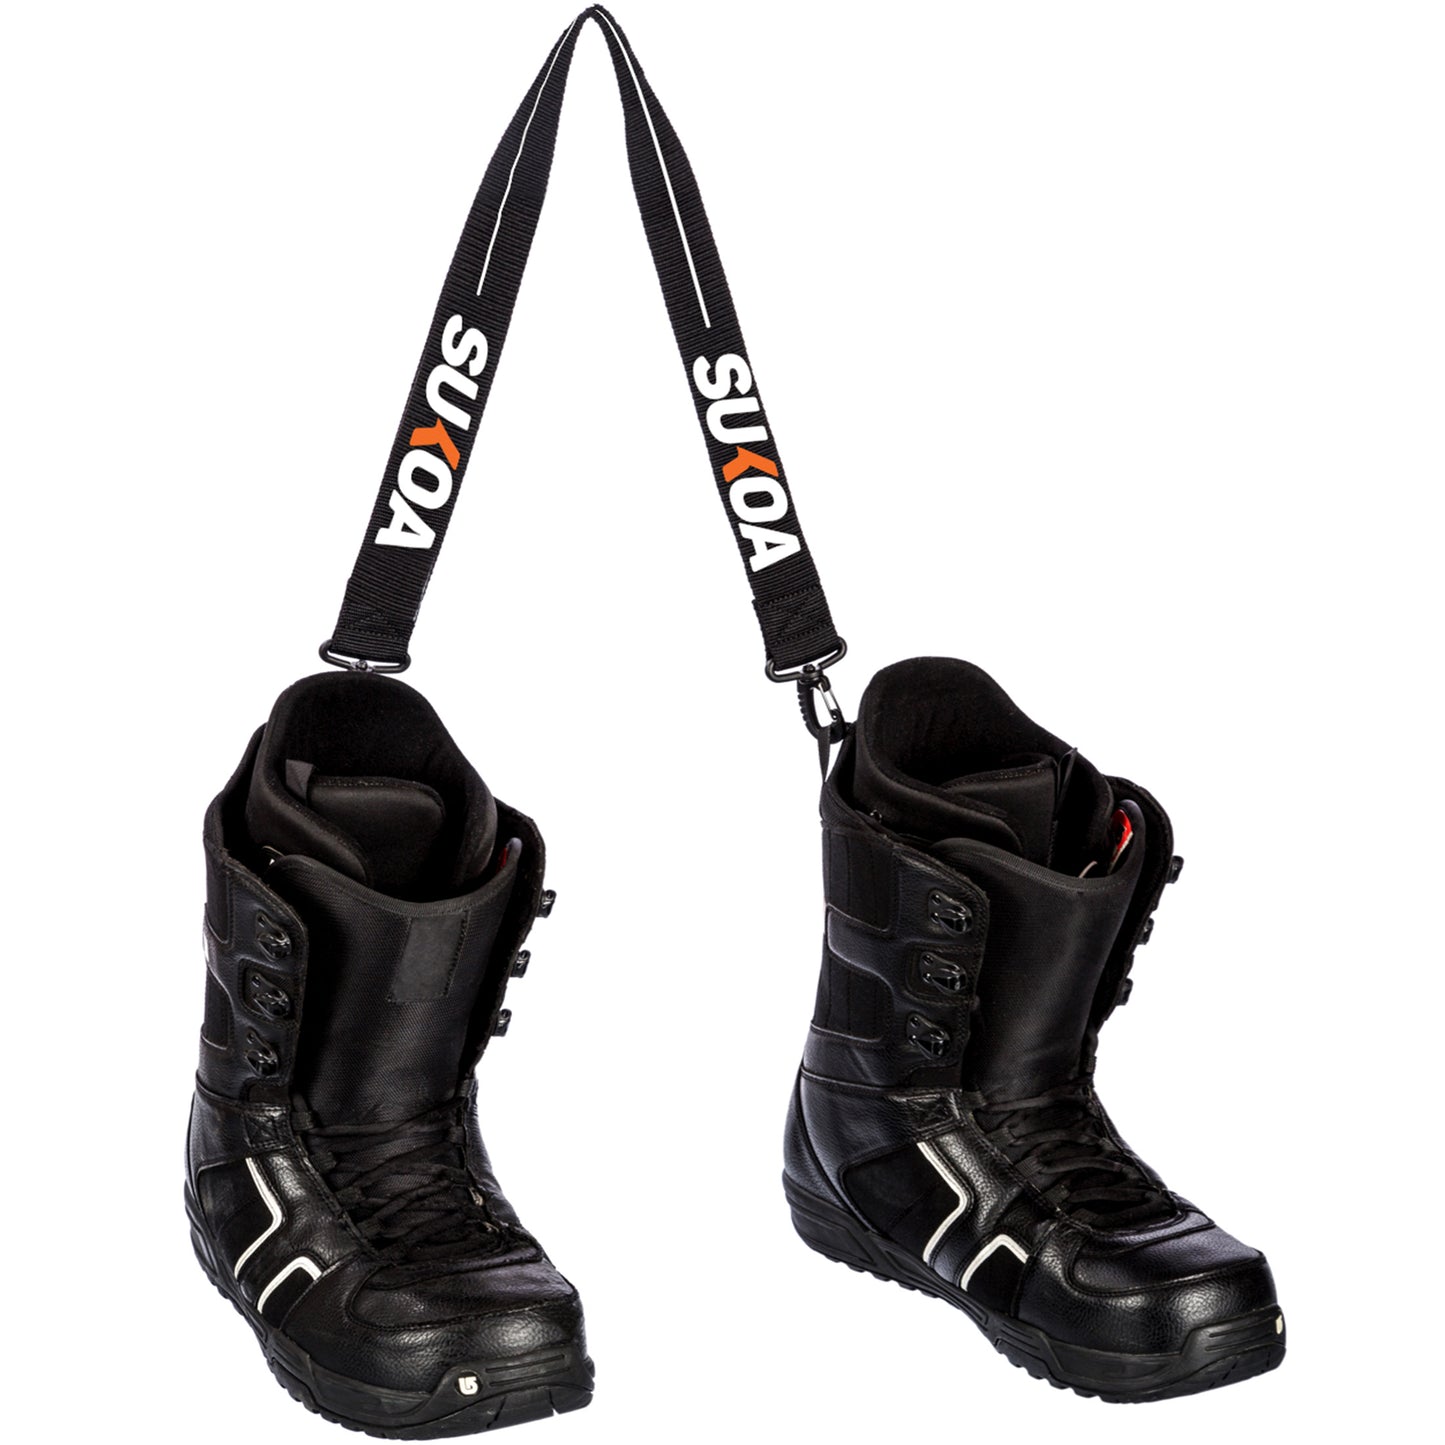 Snowboard Boot Carry Strap